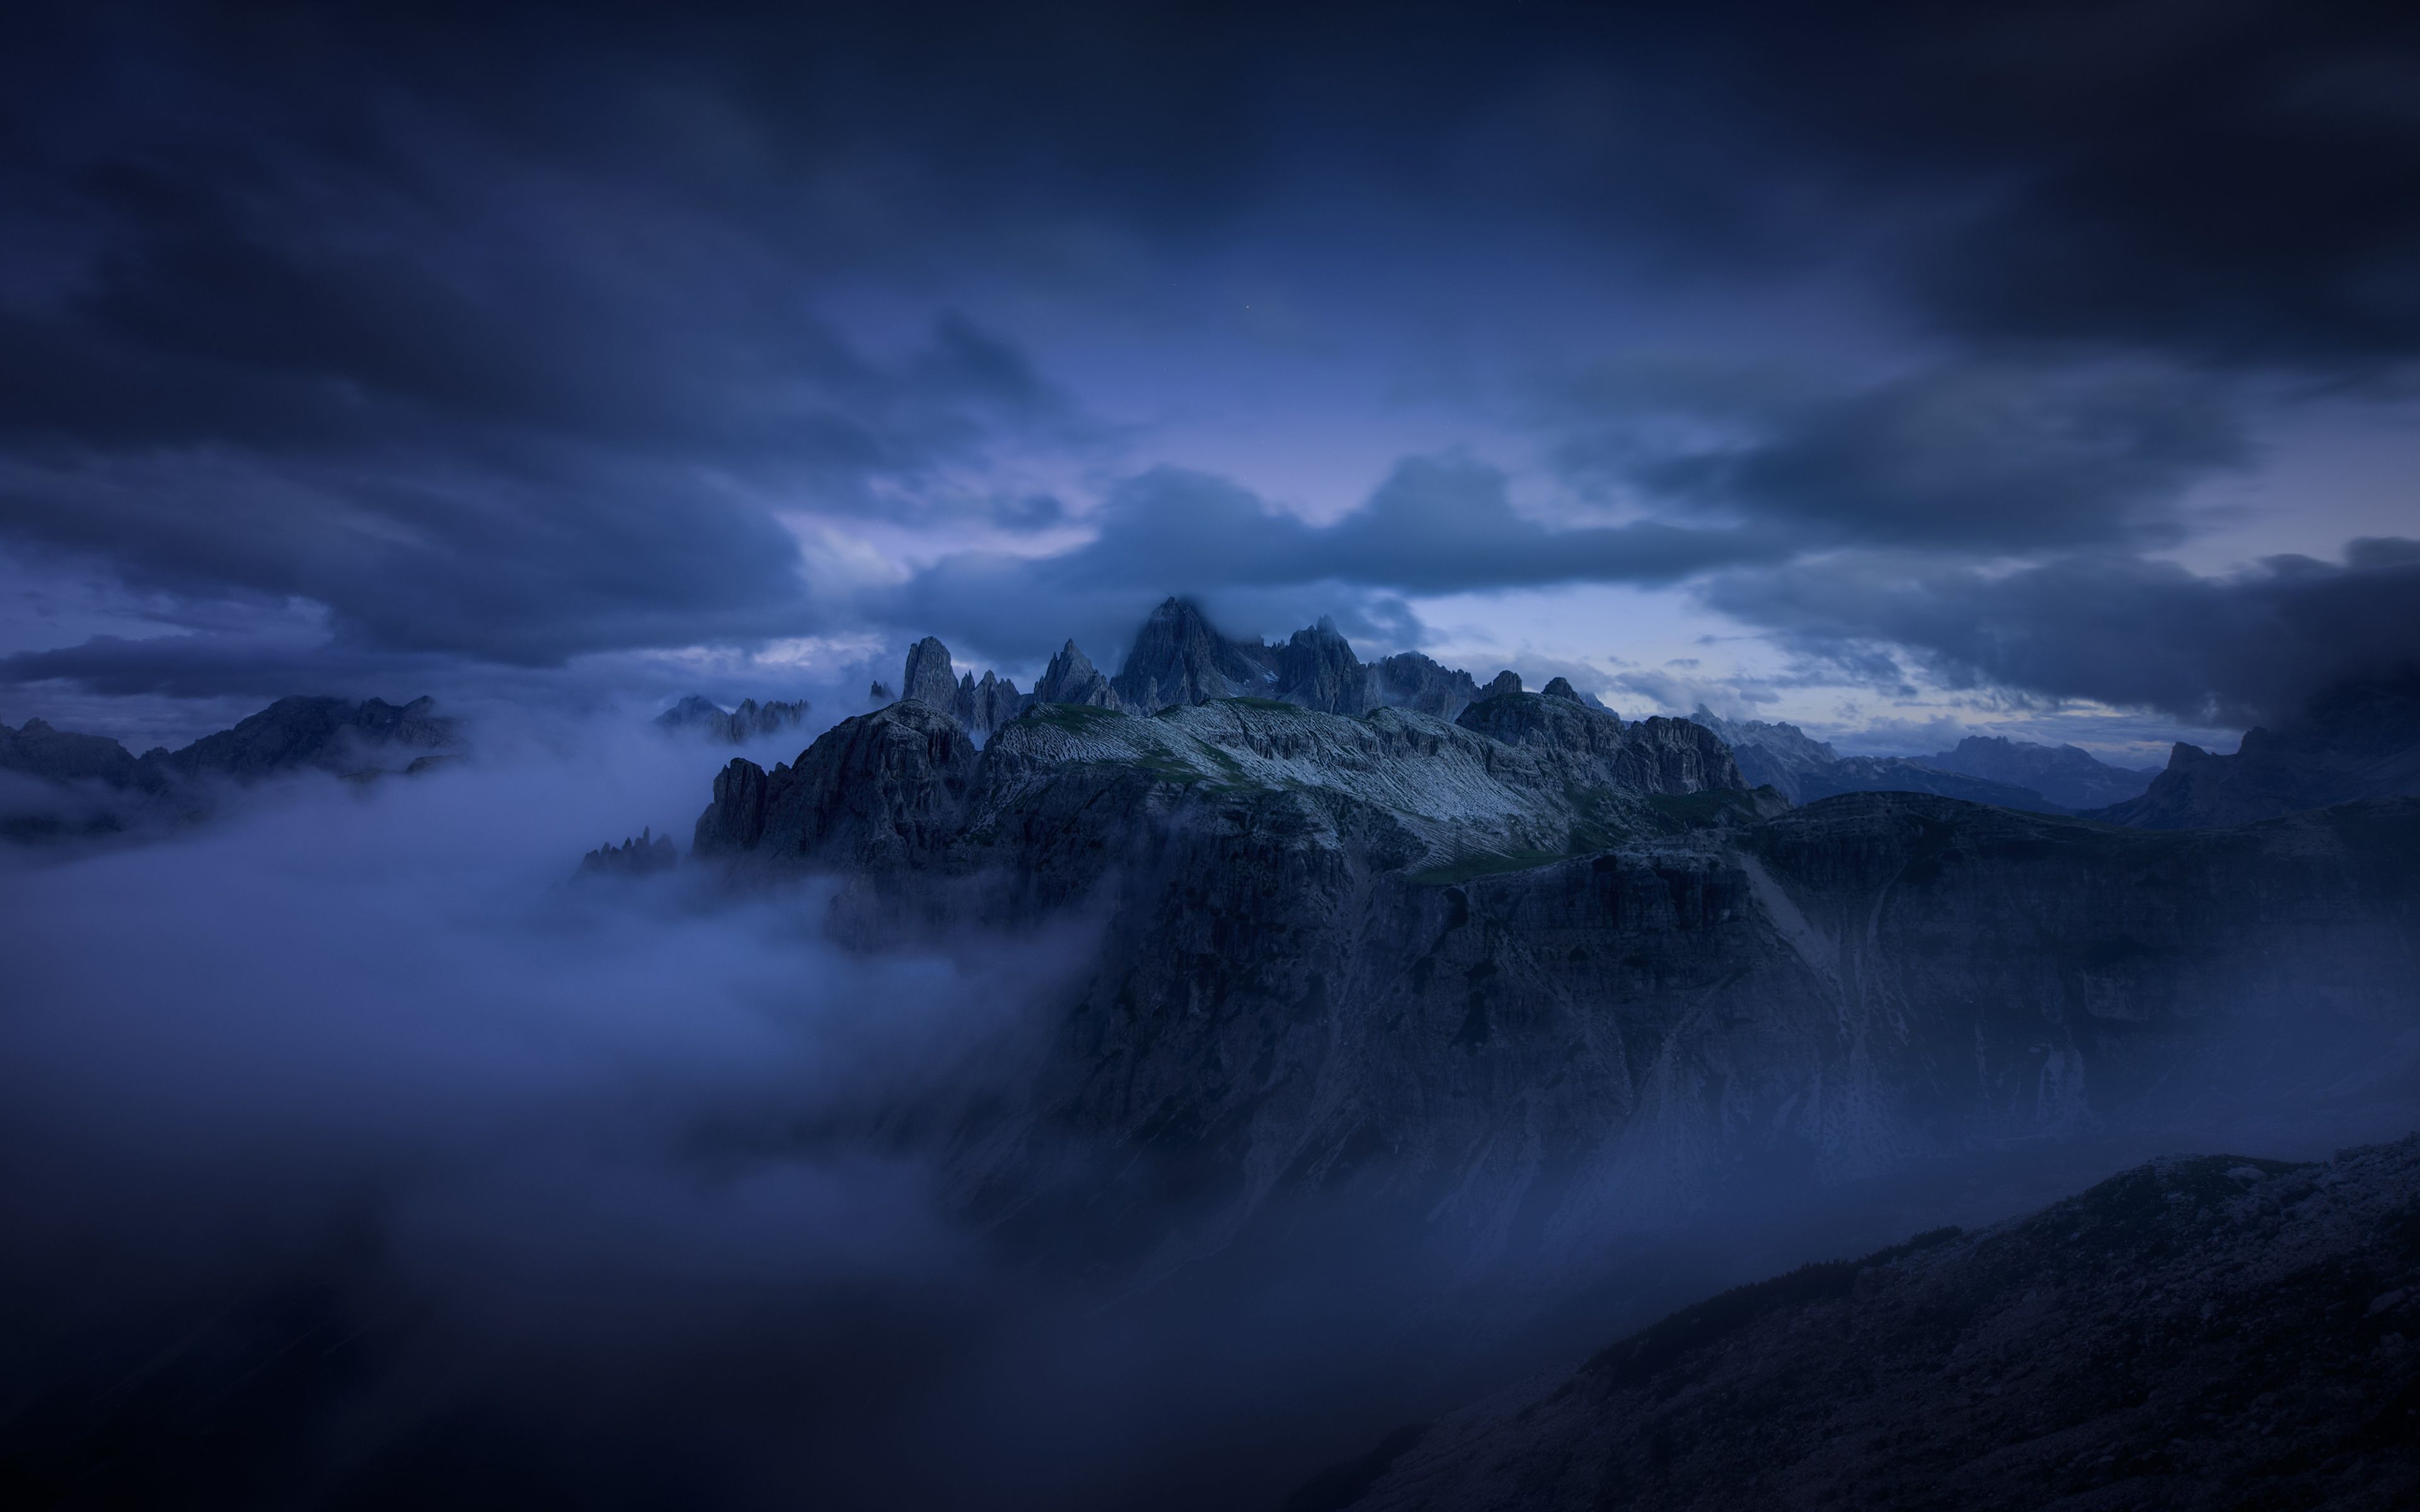 Dark Clouds over the Mountains 4k Ultra HD Wallpaper